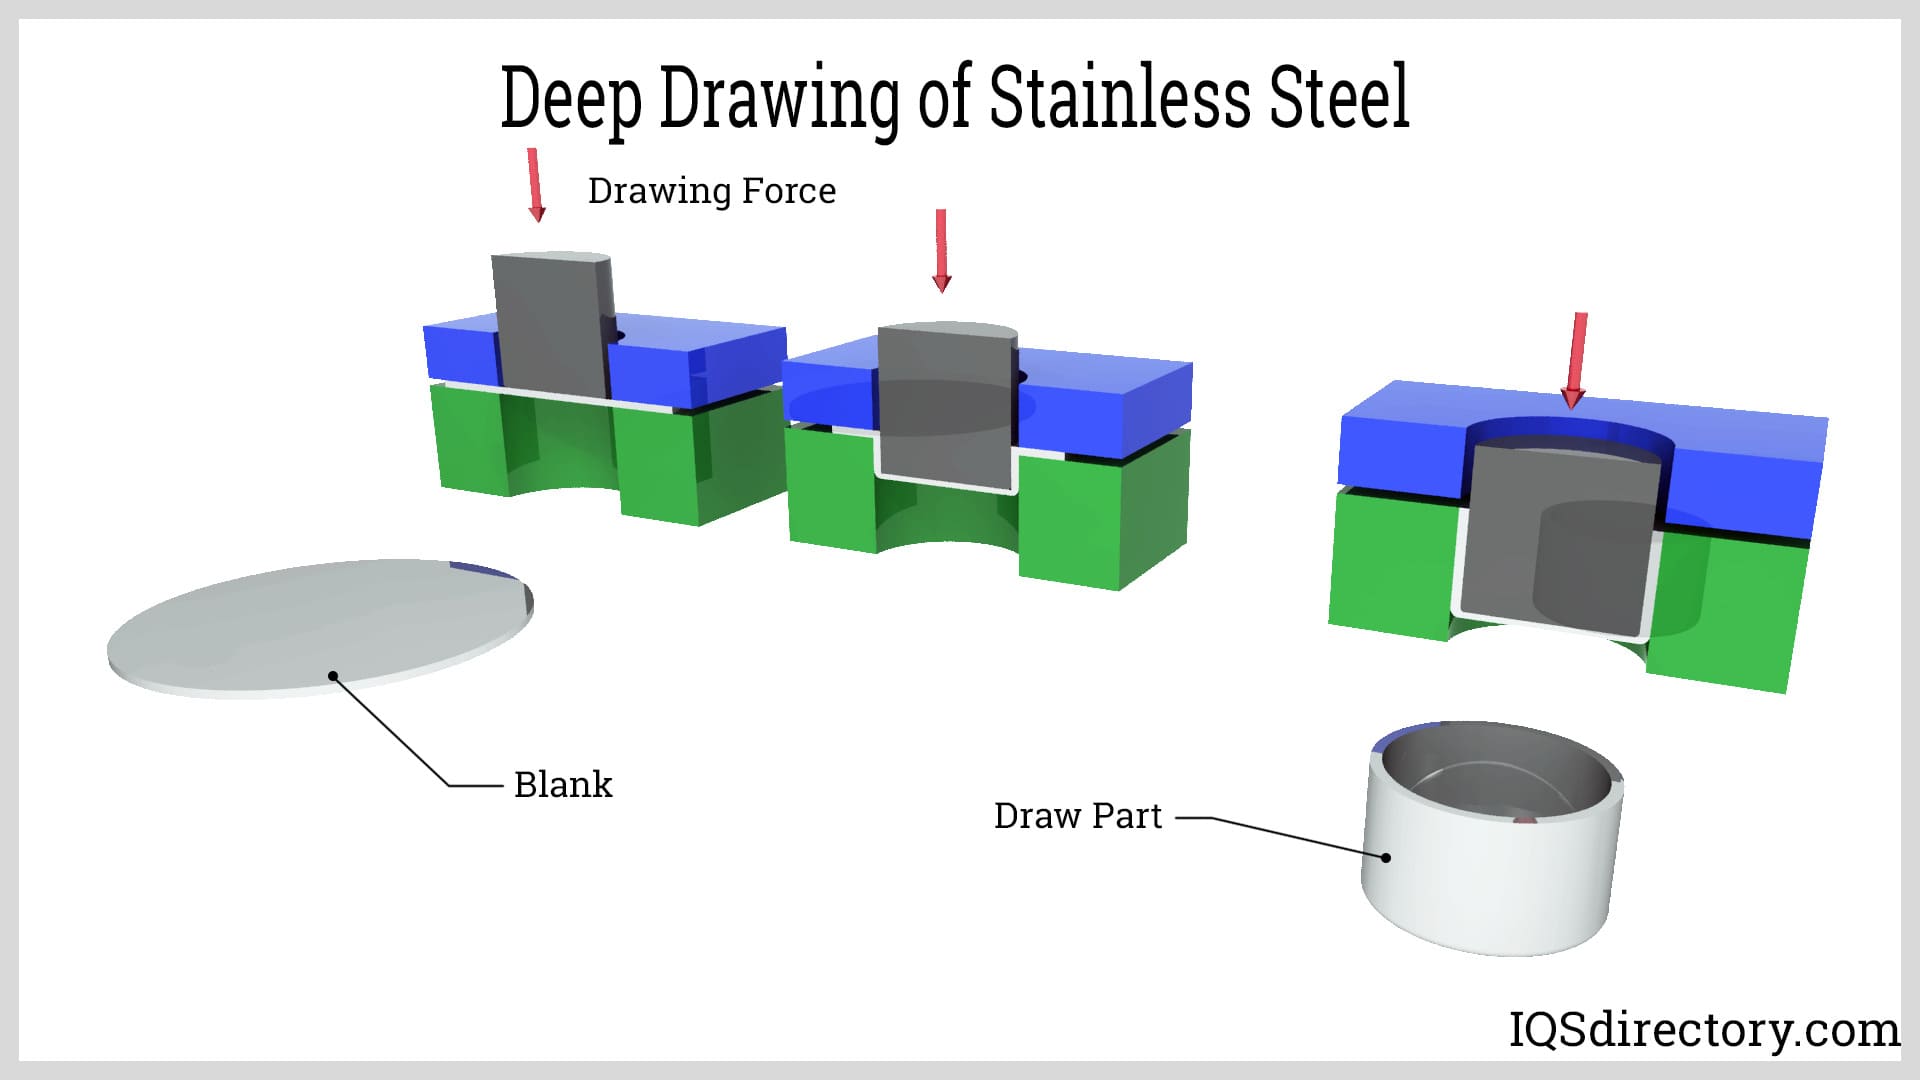 Deep Drawing of Stainless Steel